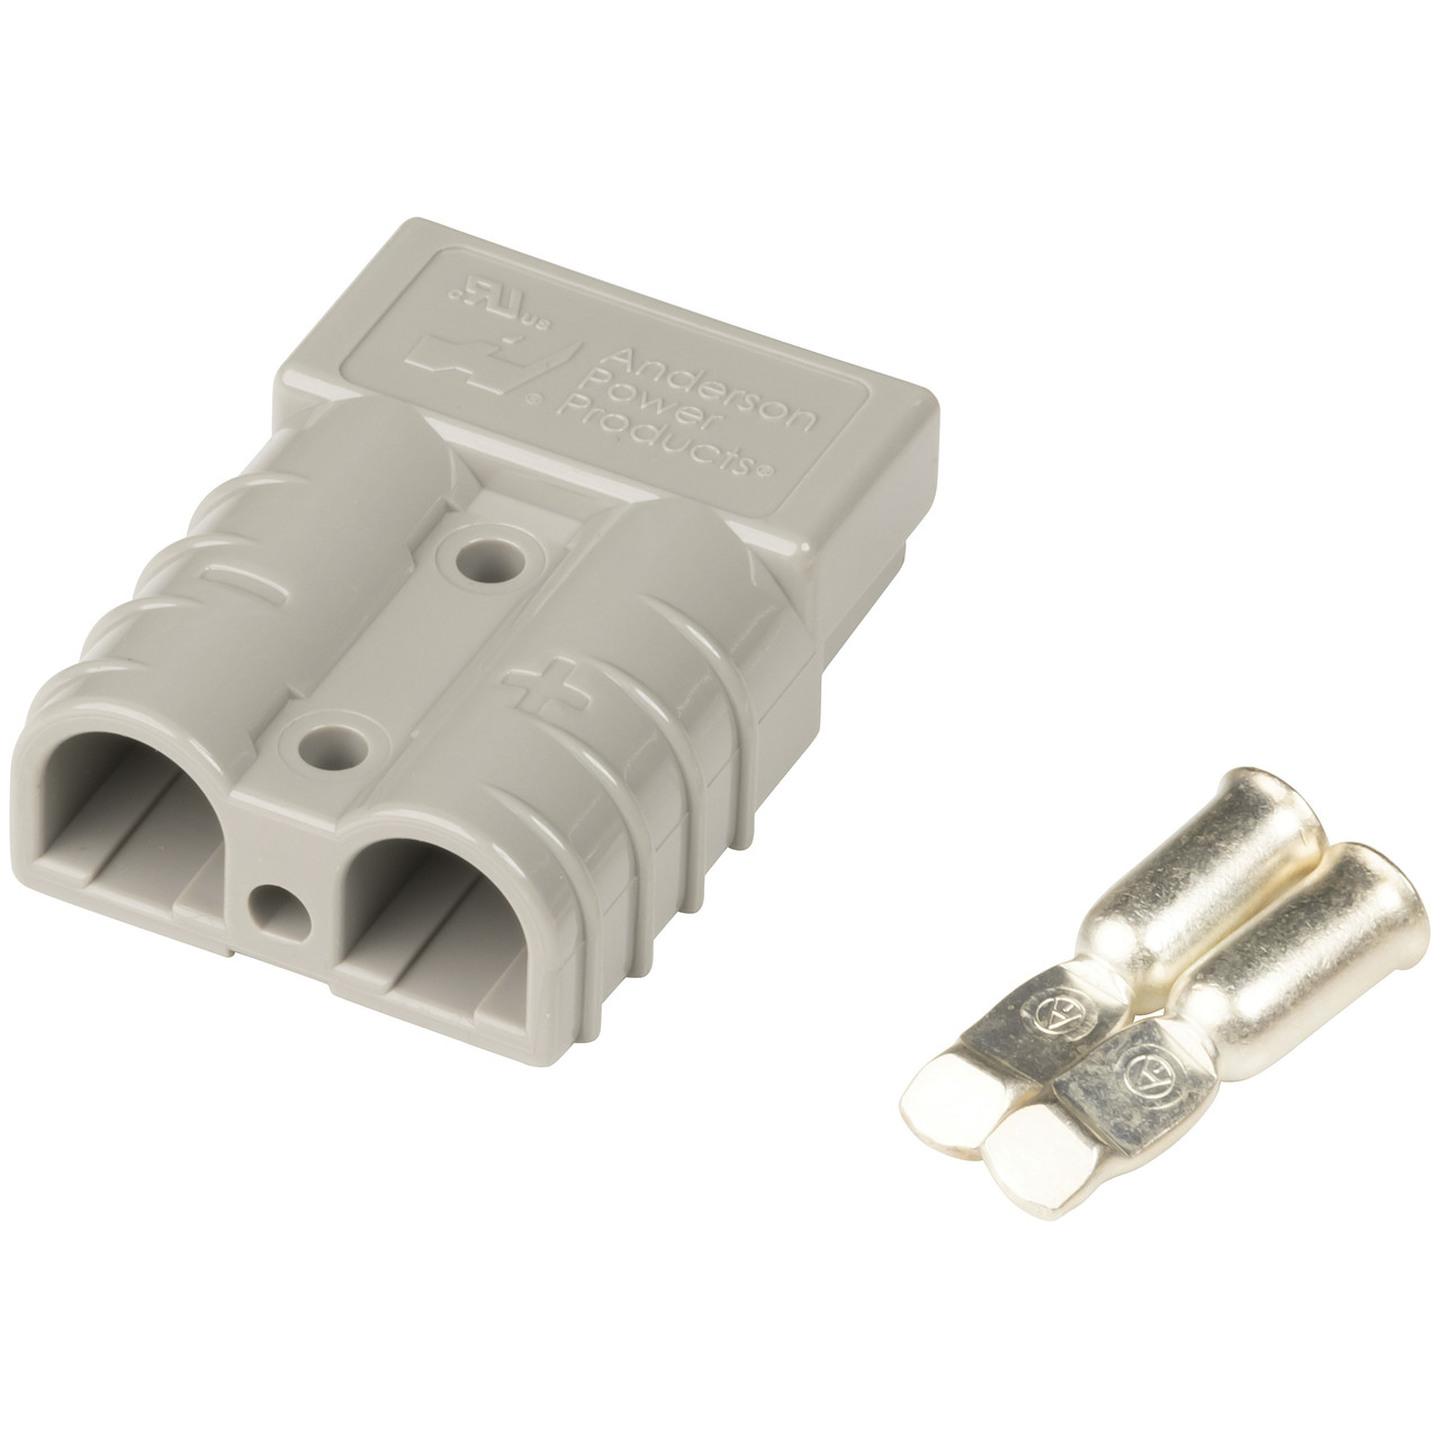 Anderson SB50 Power Connector - 50A 6 Gauge Contacts